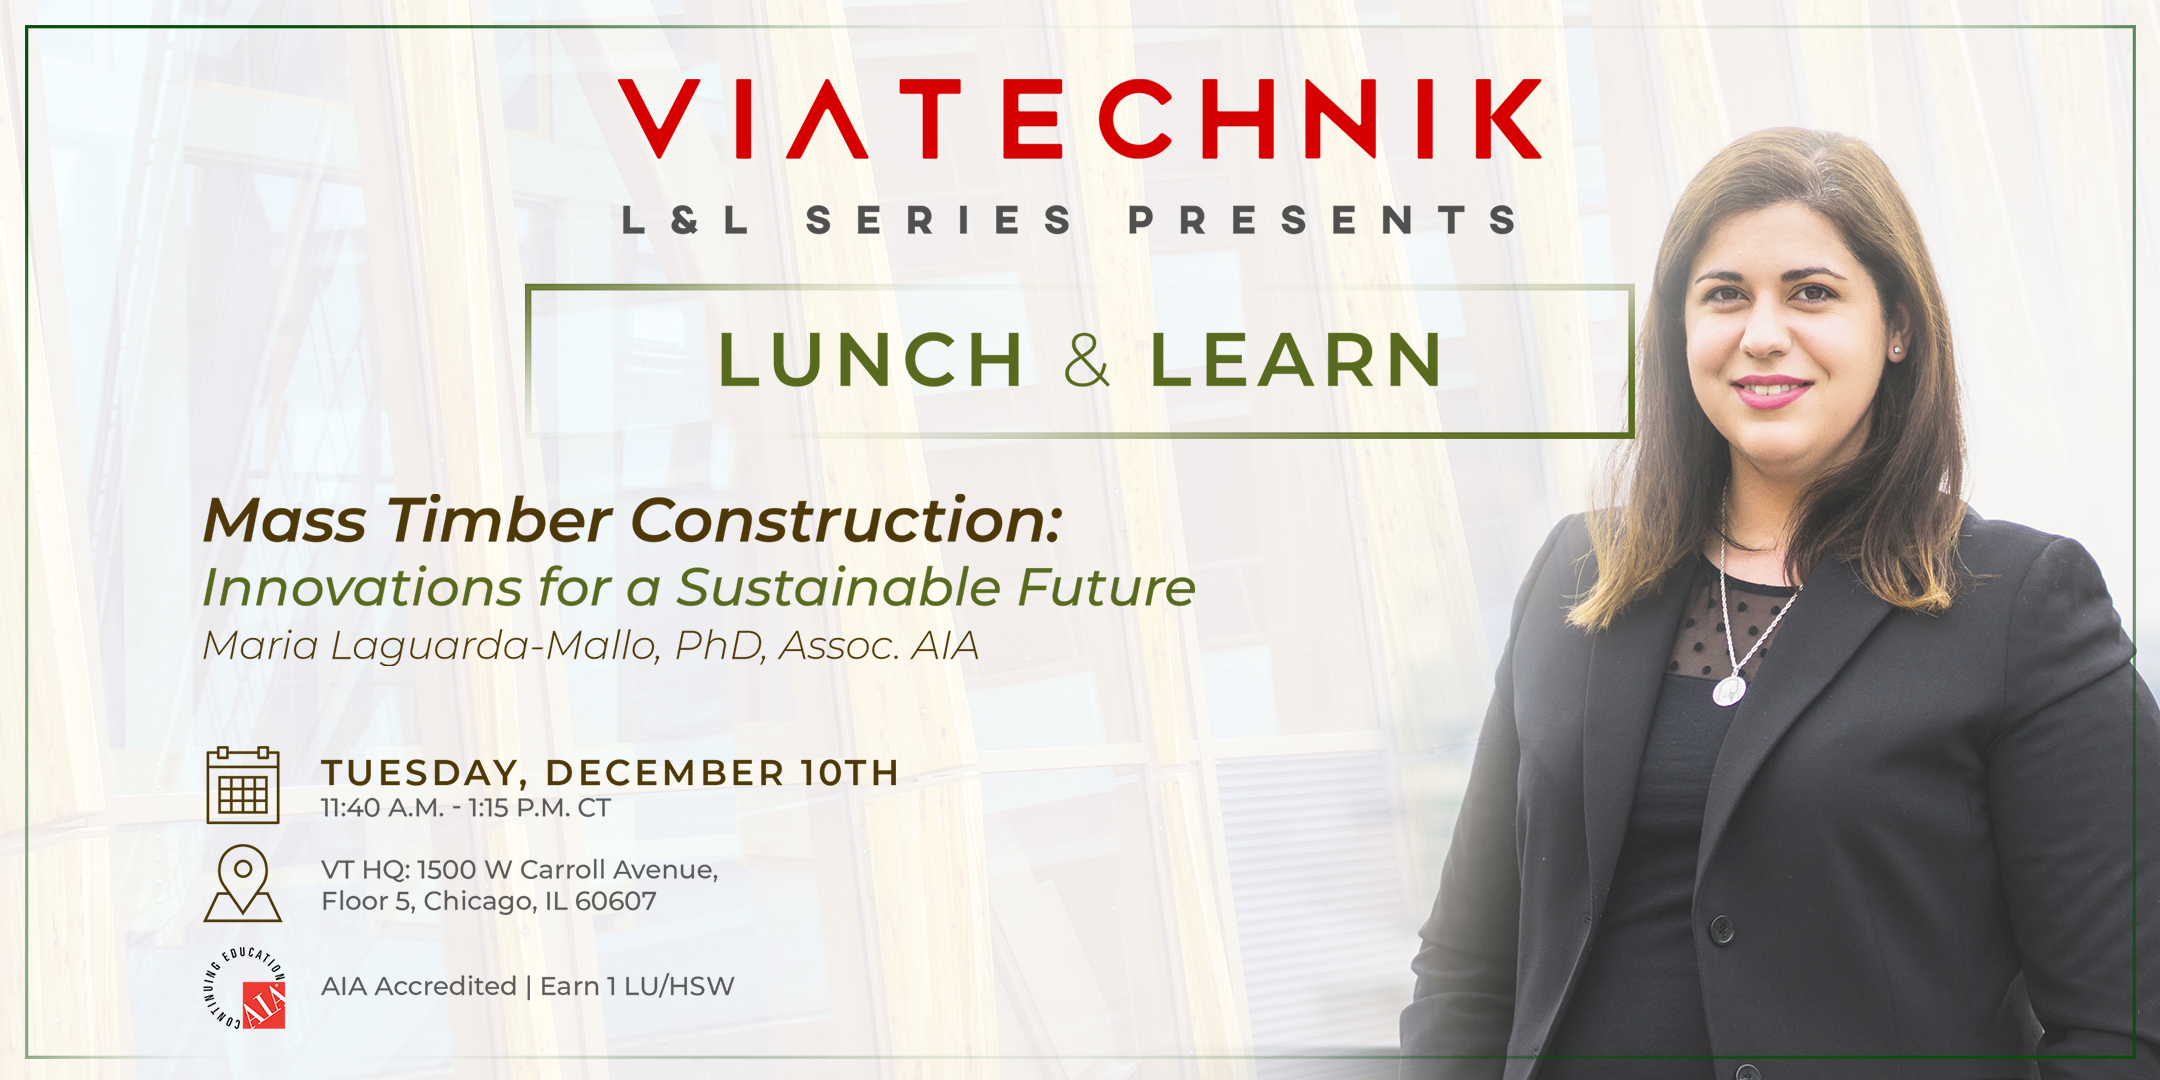 VIATechnik Lunch and Learn Series - Mass Timber Construction: Innovations for a Sustainable Future